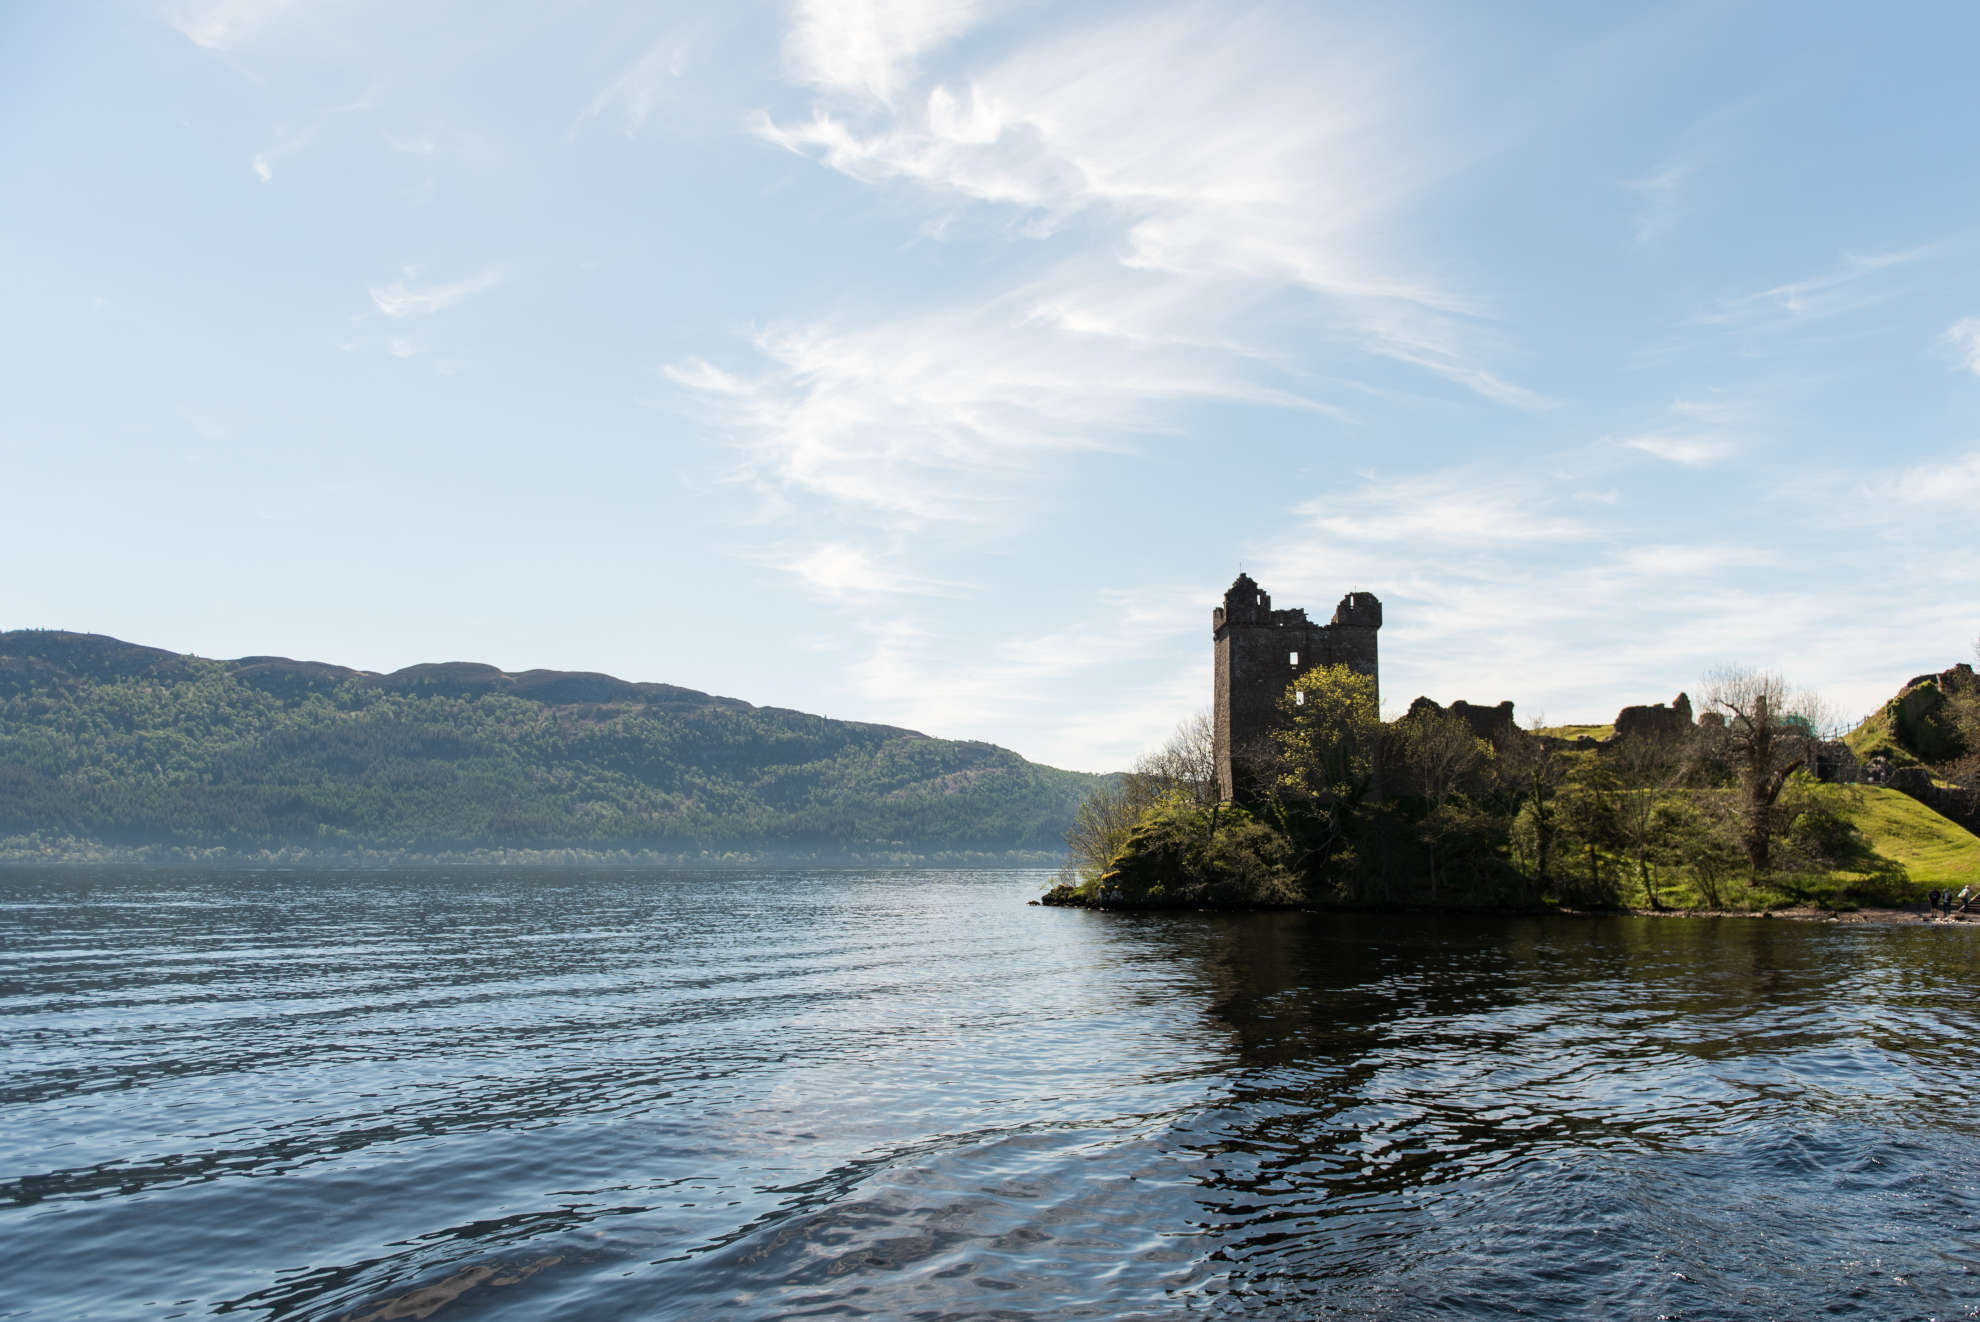 Loch Ness, Inverness & The Highlands